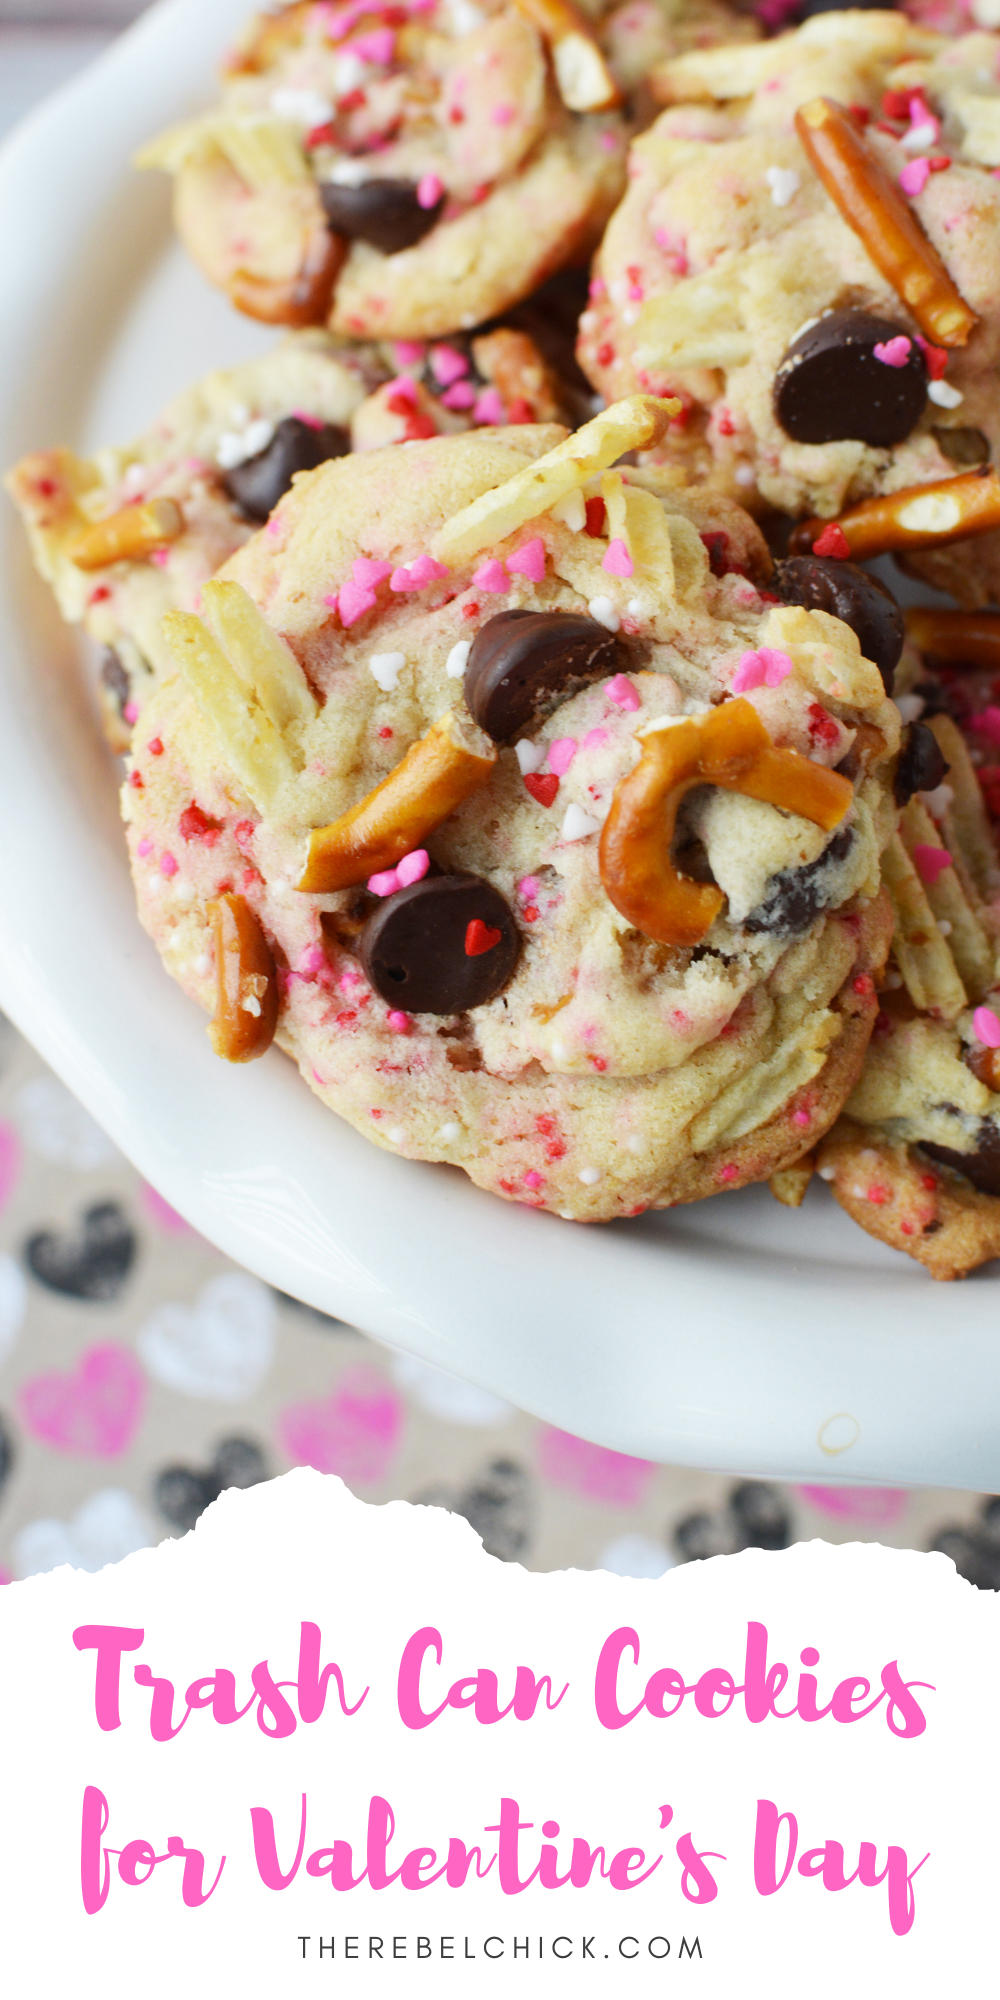 Cupid's Trash Cookies for Valentine's Day